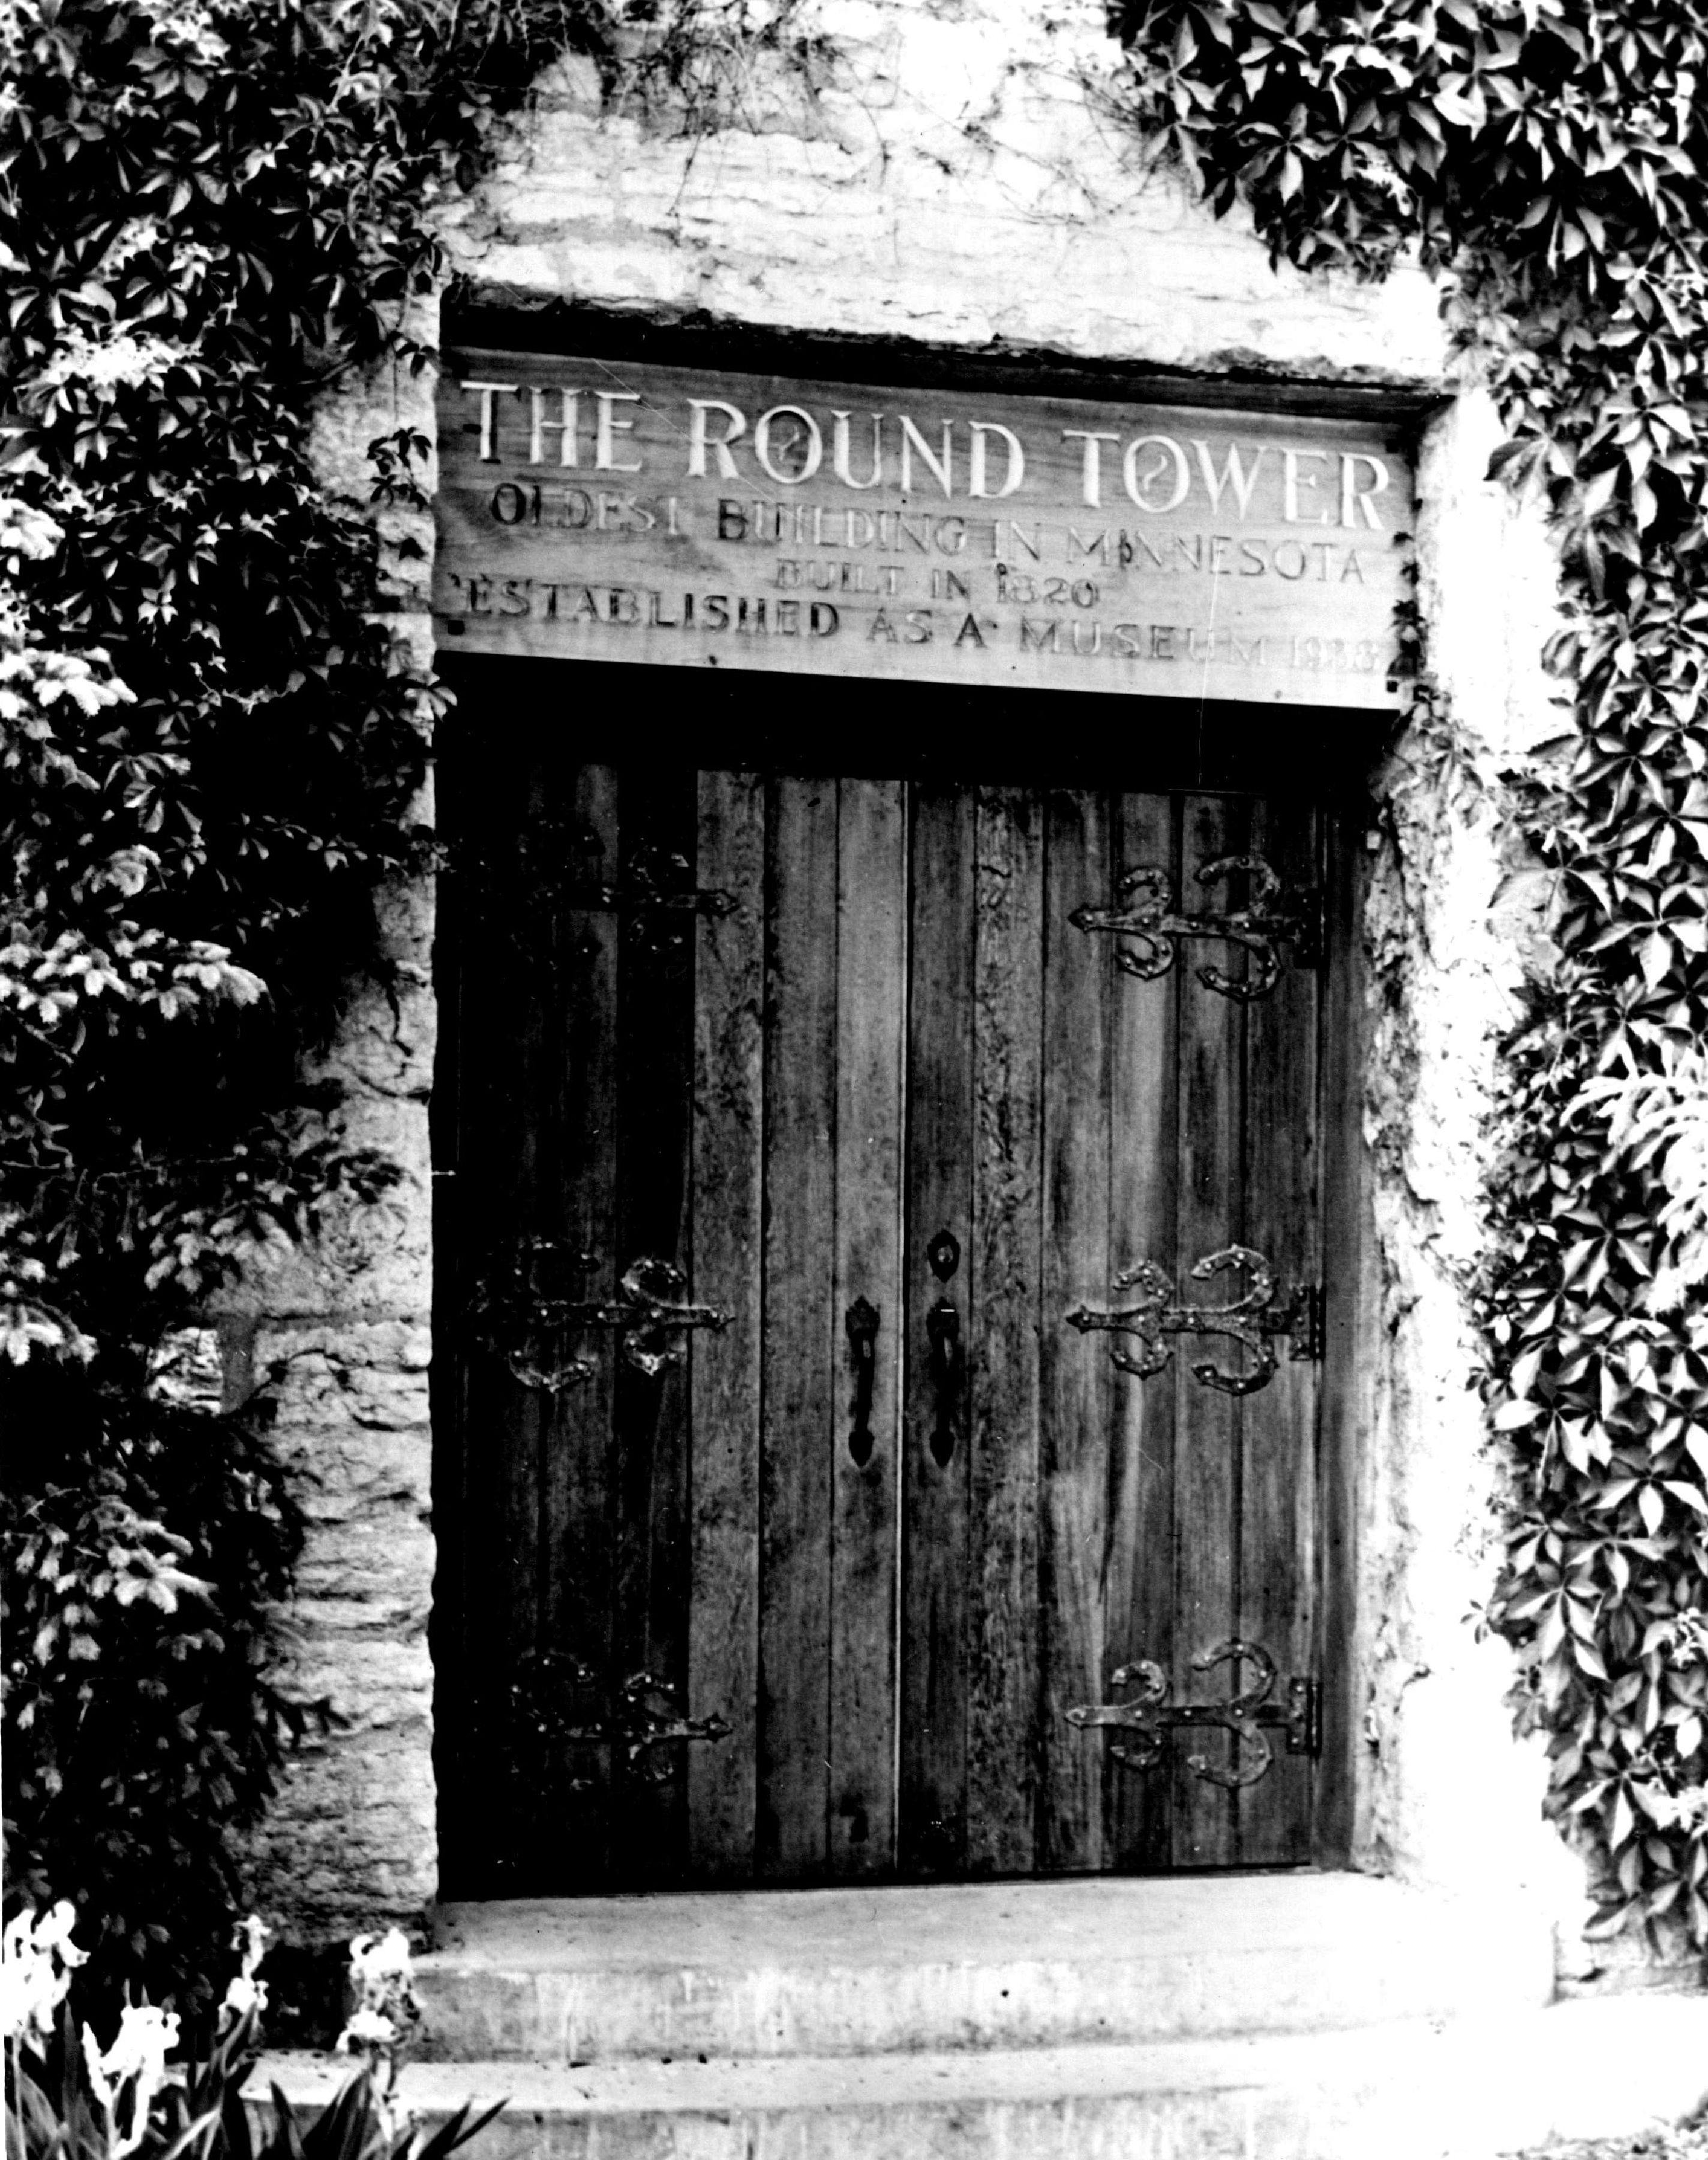 The entrance to the Round Tower in 1954. The sign above the door states it is the oldest building in Minnesota.